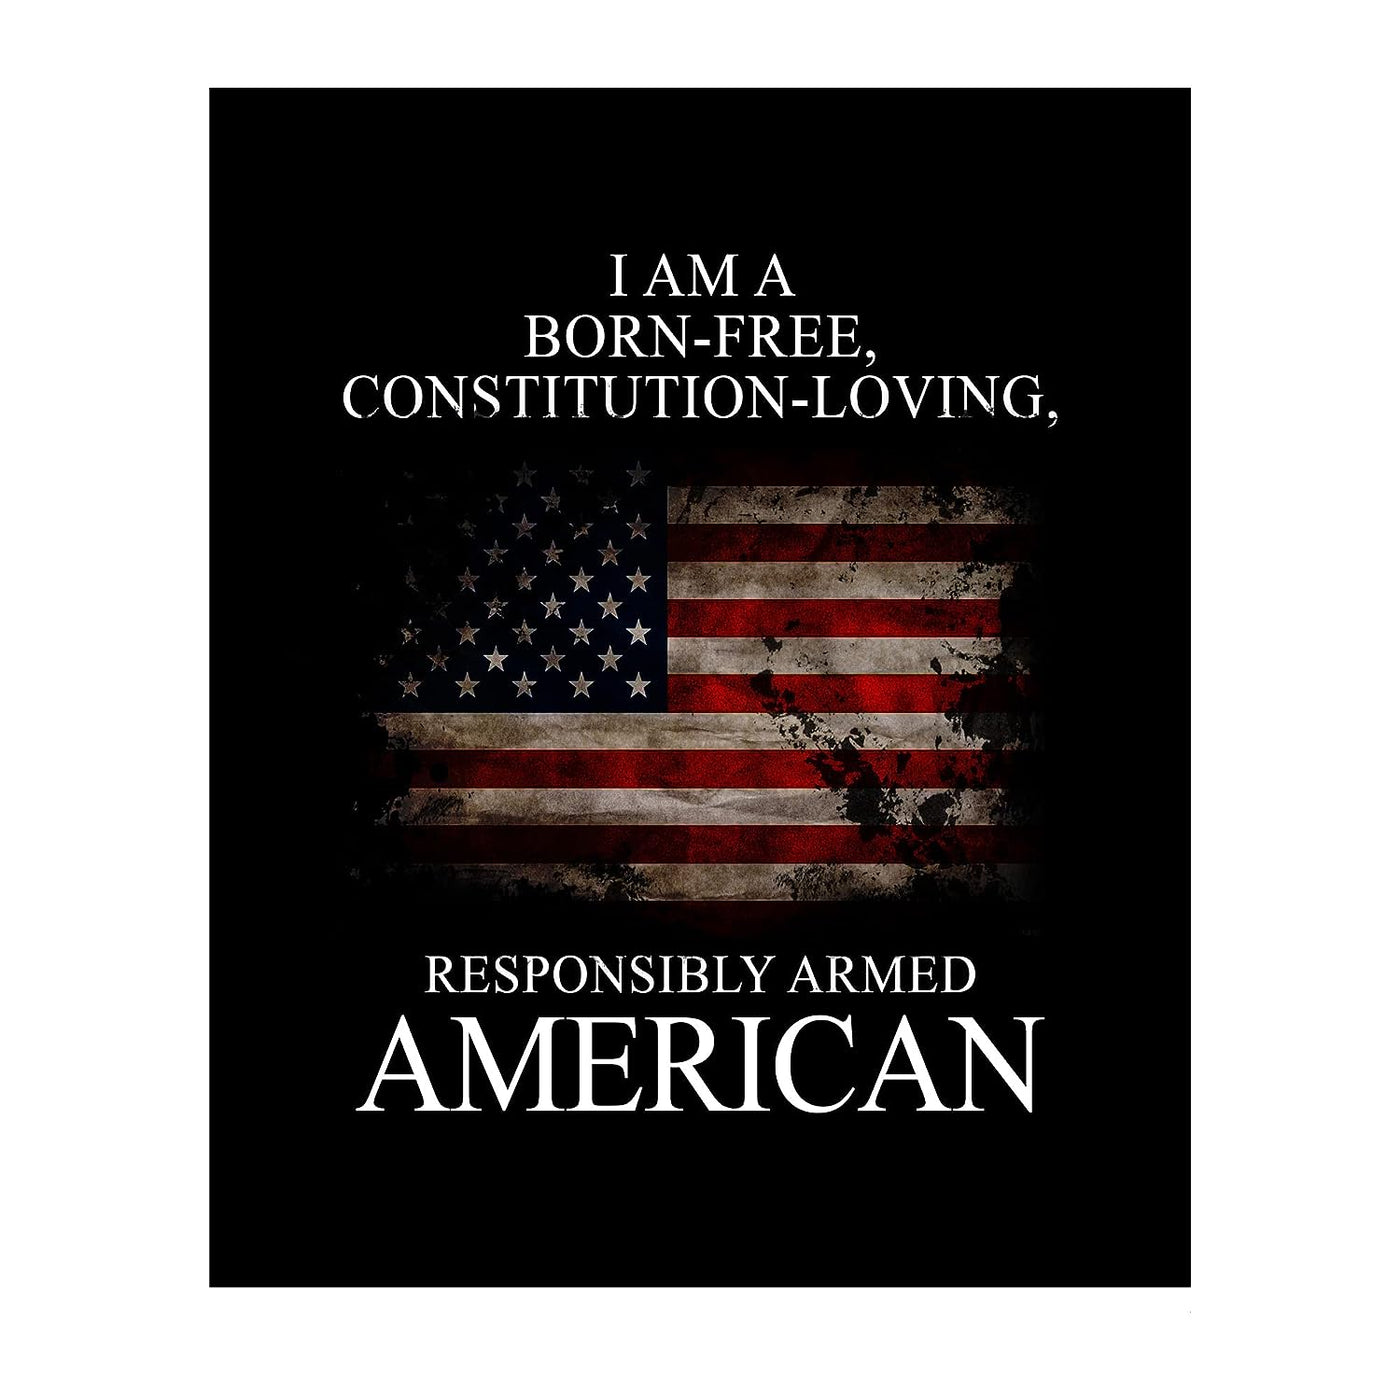 I Am A Born-Free, Responsibly Armed American-Patriotic Quotes Wall Art- 8 x 10" Pro-American Poster Print-Ready To Frame. Perfect Home-Office-Garage-Bar-Cave Decor. Display Your American Pride!